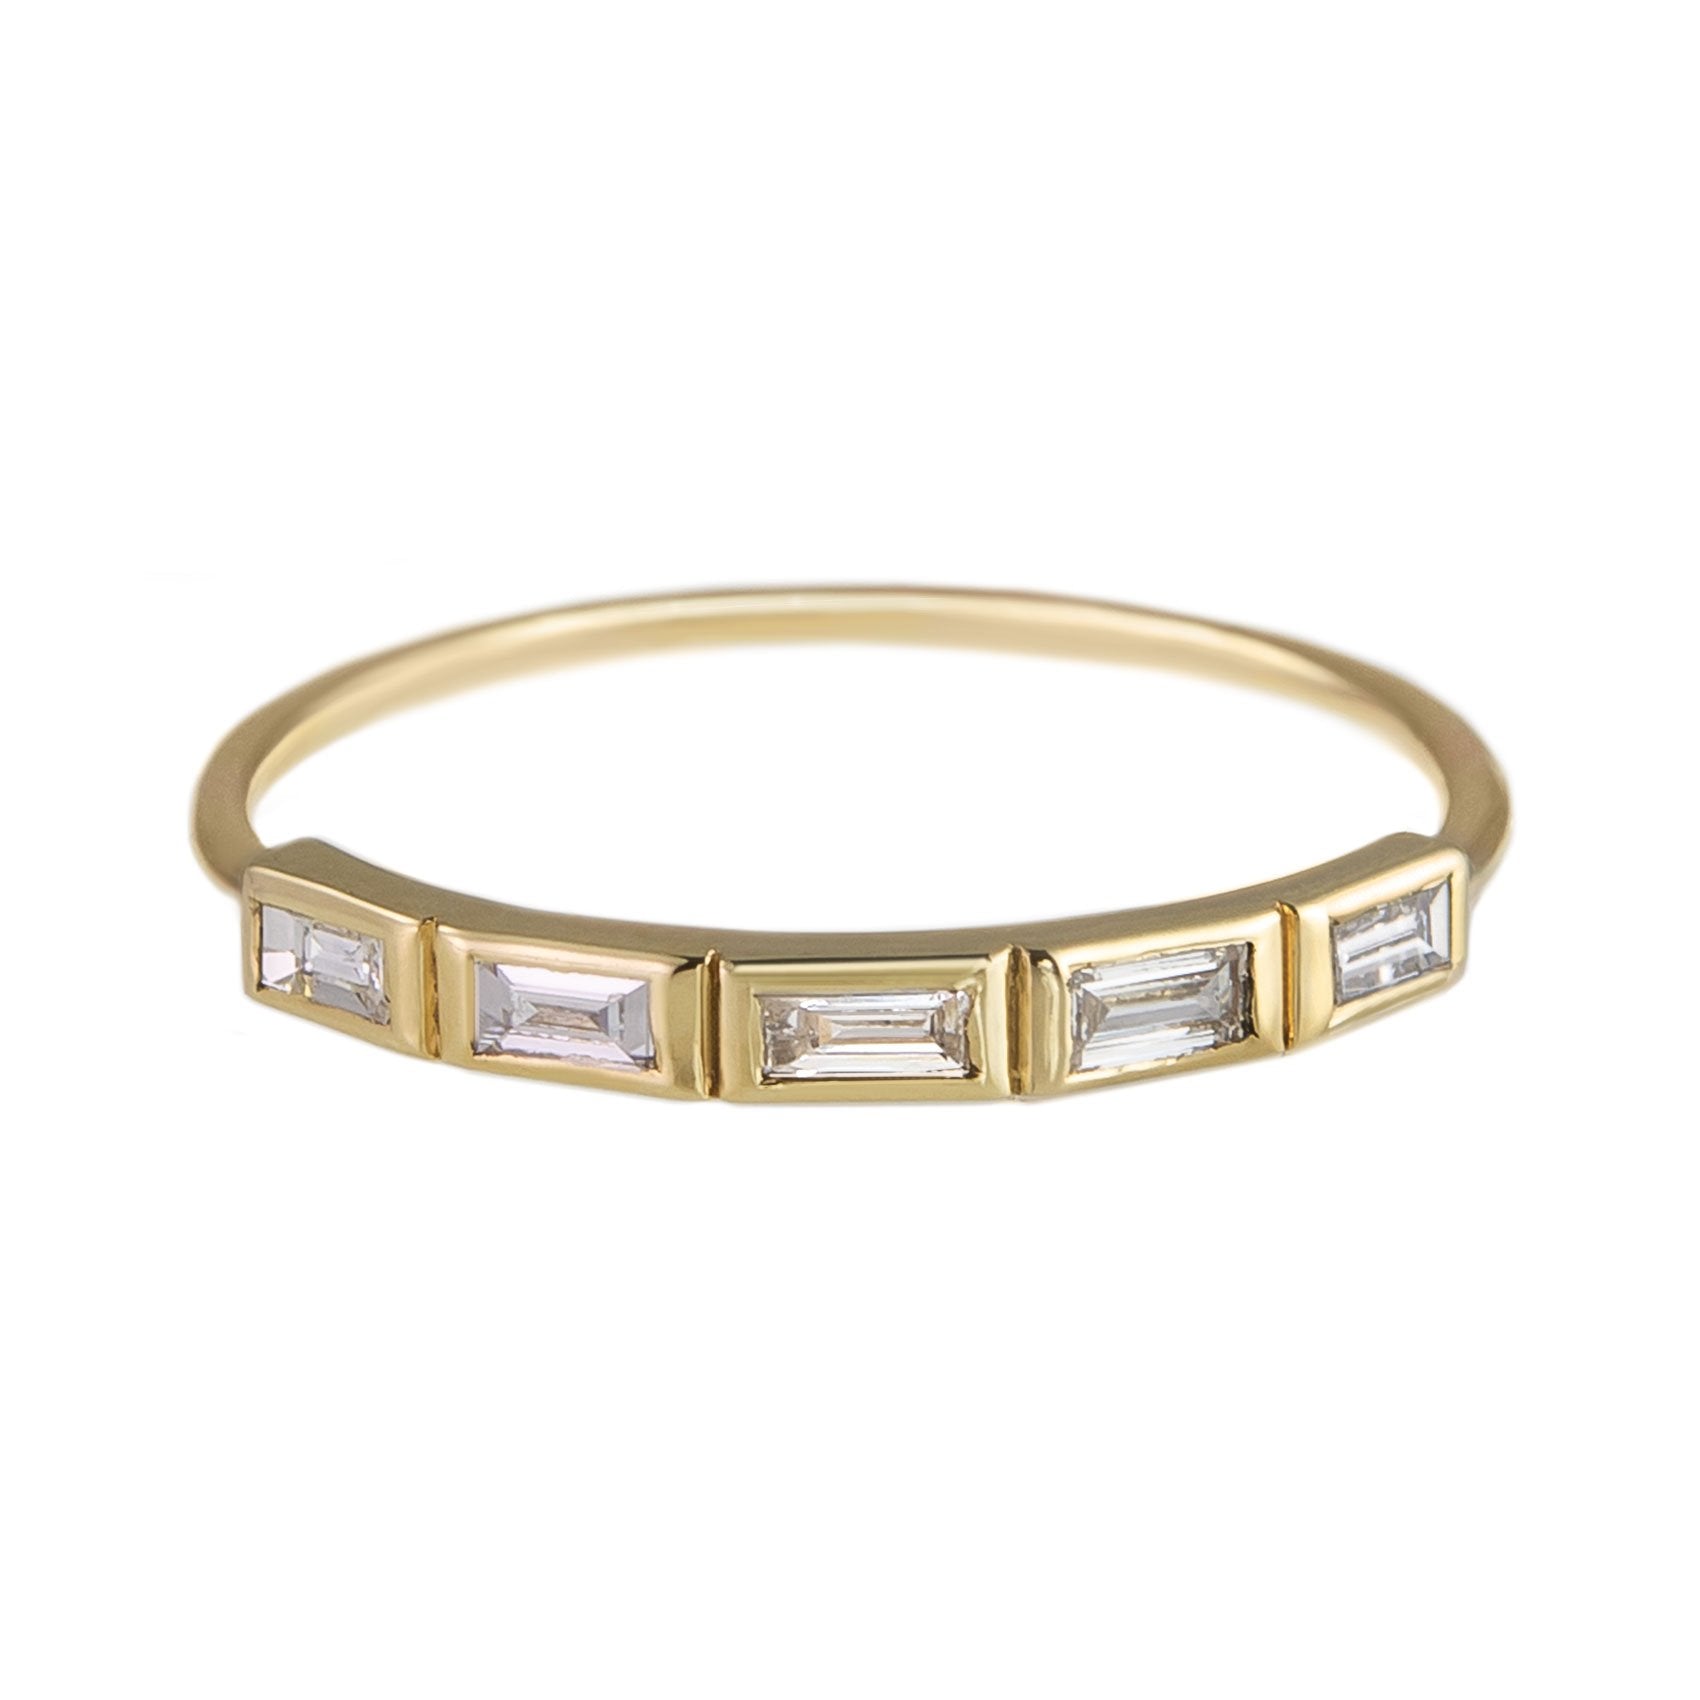 Metier by tomfoolery 5 Stone White Diamond Ring in 9ct Yellow Gold with Baguette Diamonds